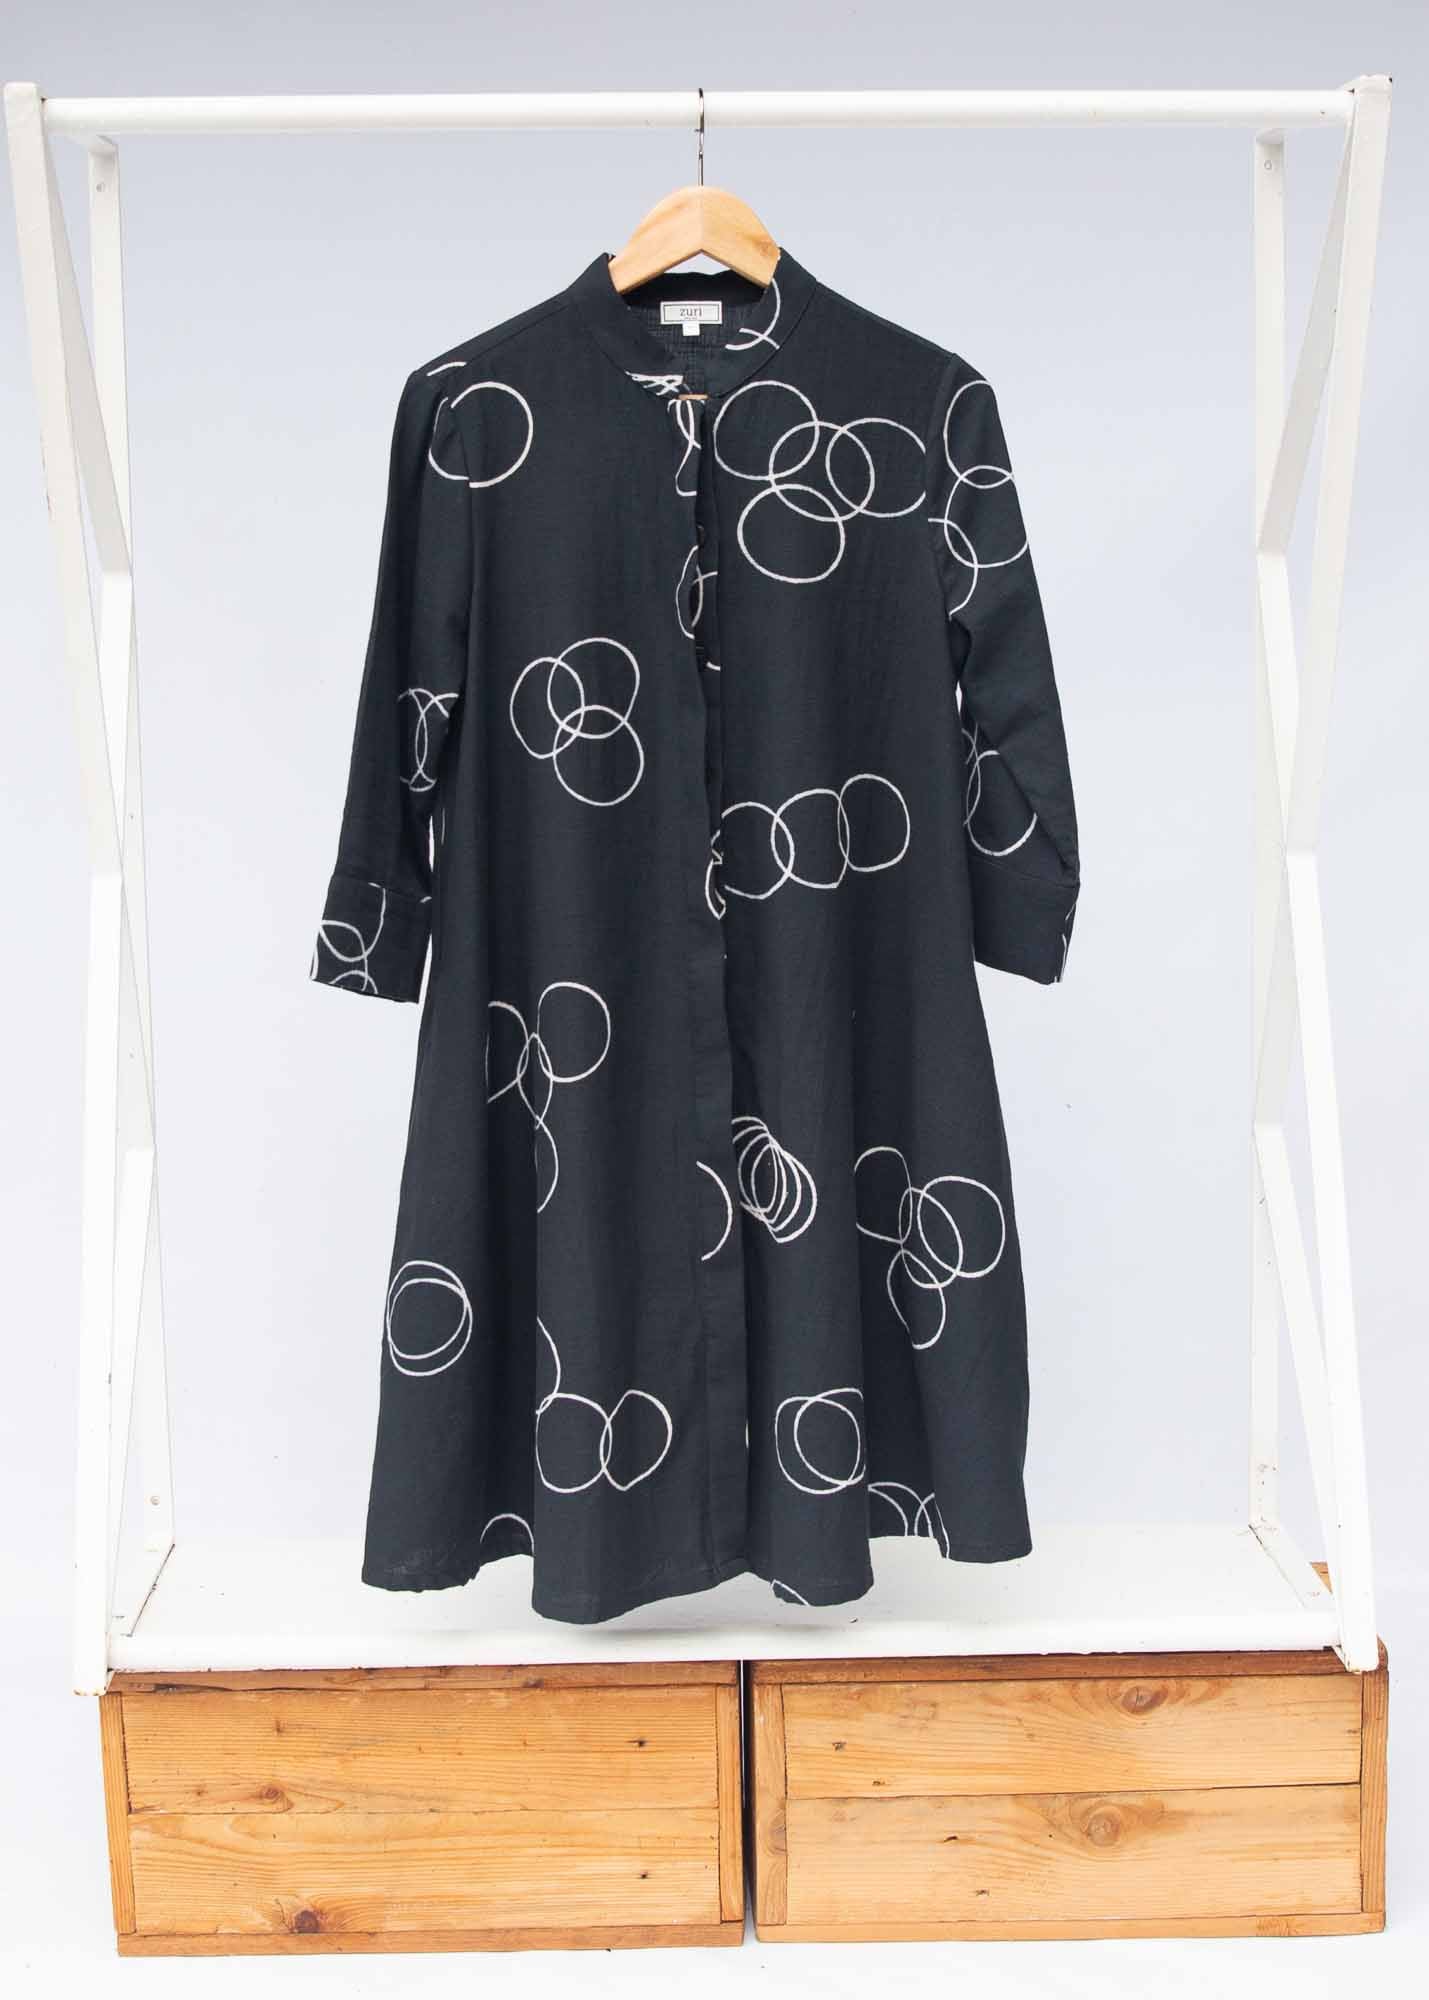 The display of solid black dress with white circular print